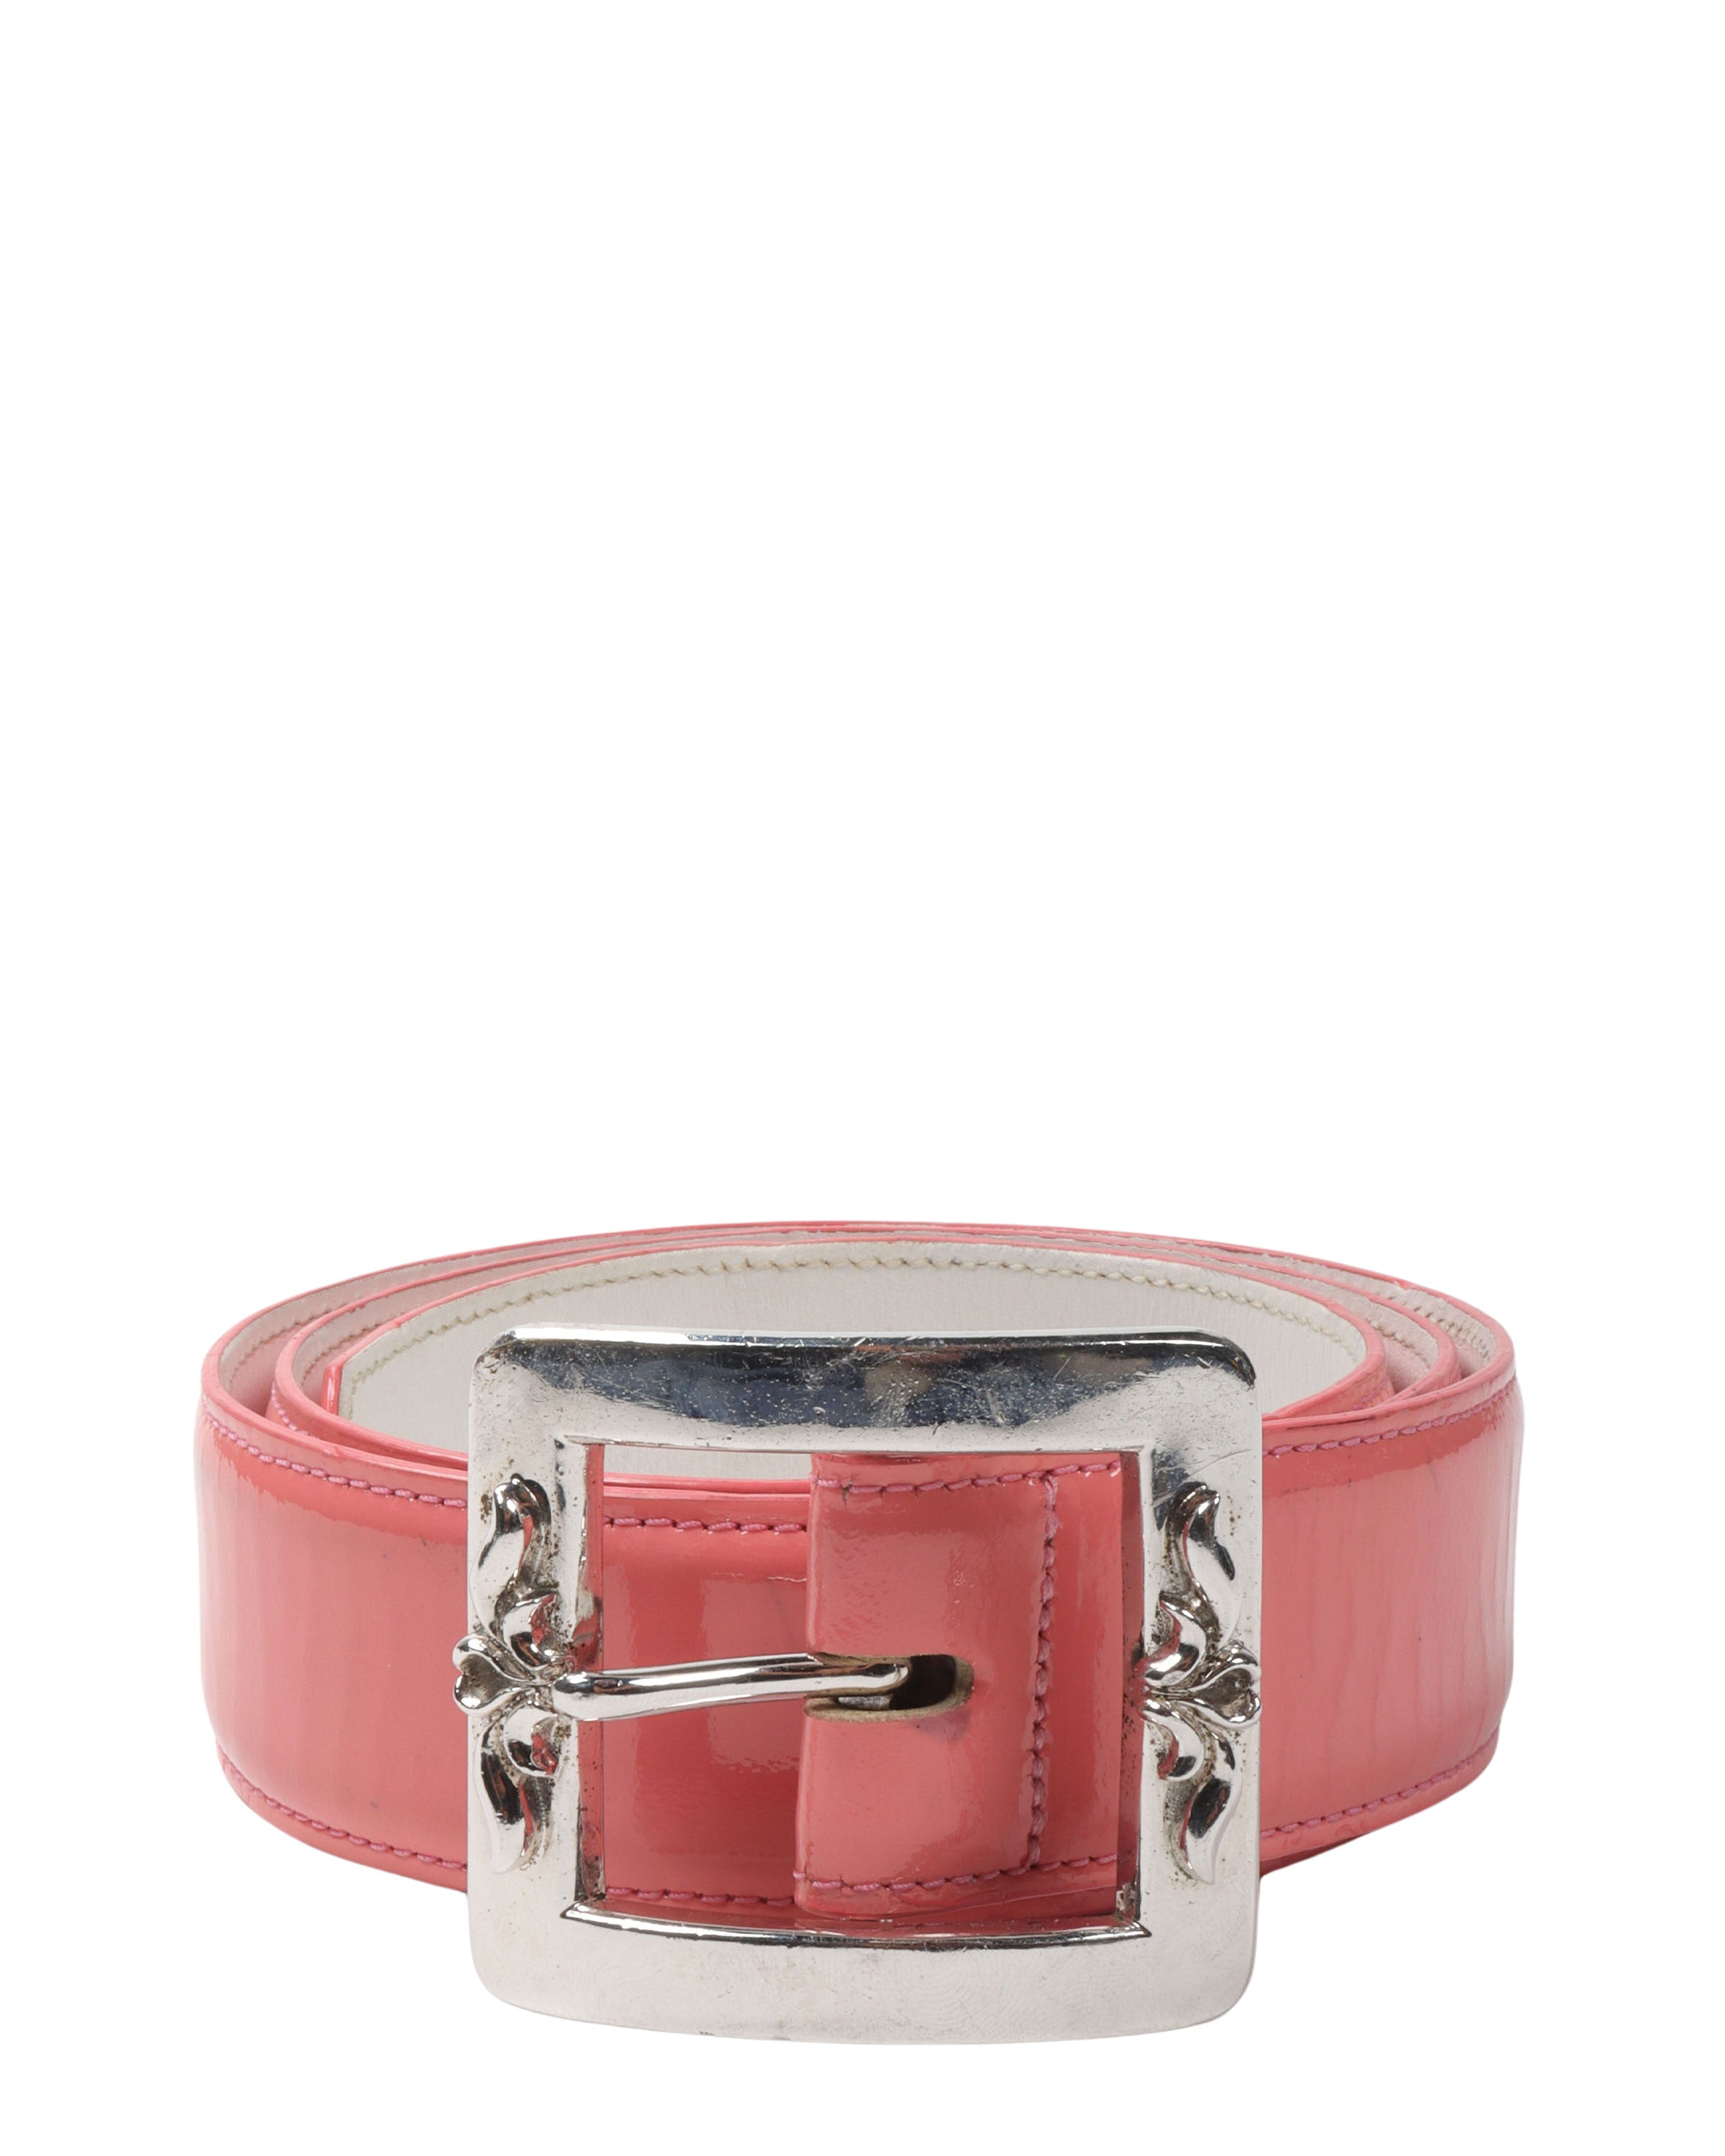 Square Buckle Patent Leather Belt